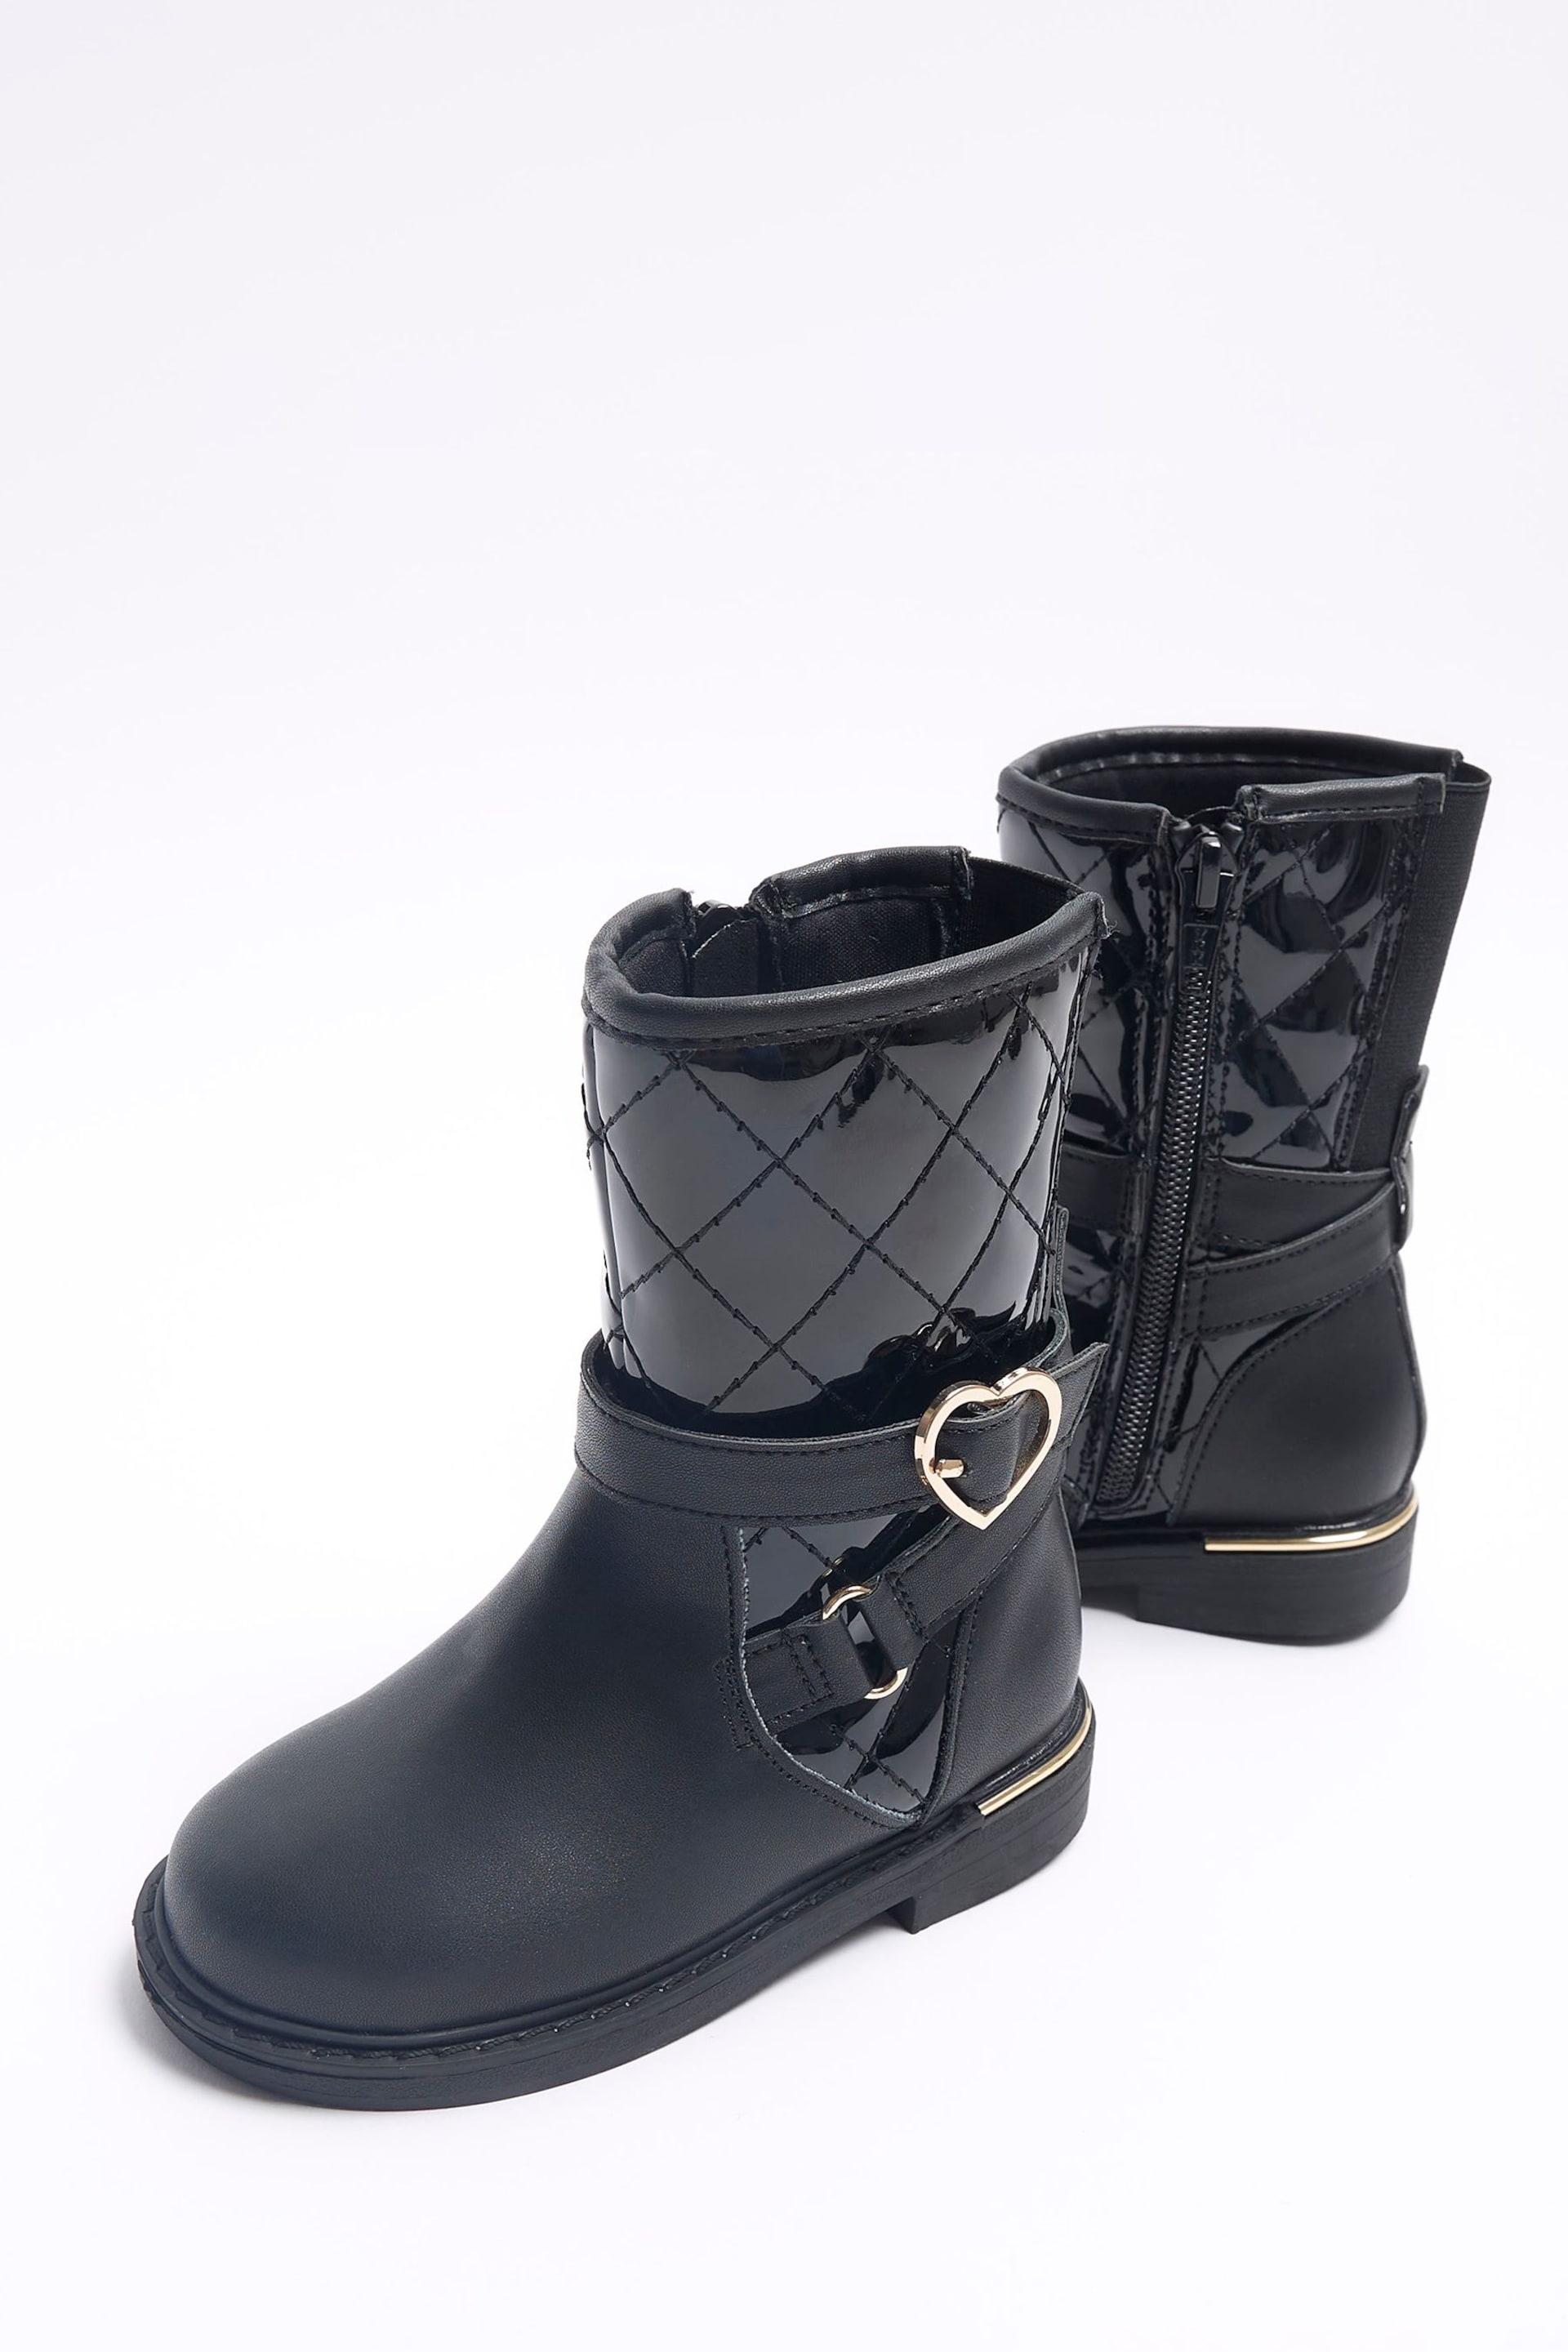 River Island Black Girls Heart Buckle Knee High Boots - Image 4 of 5